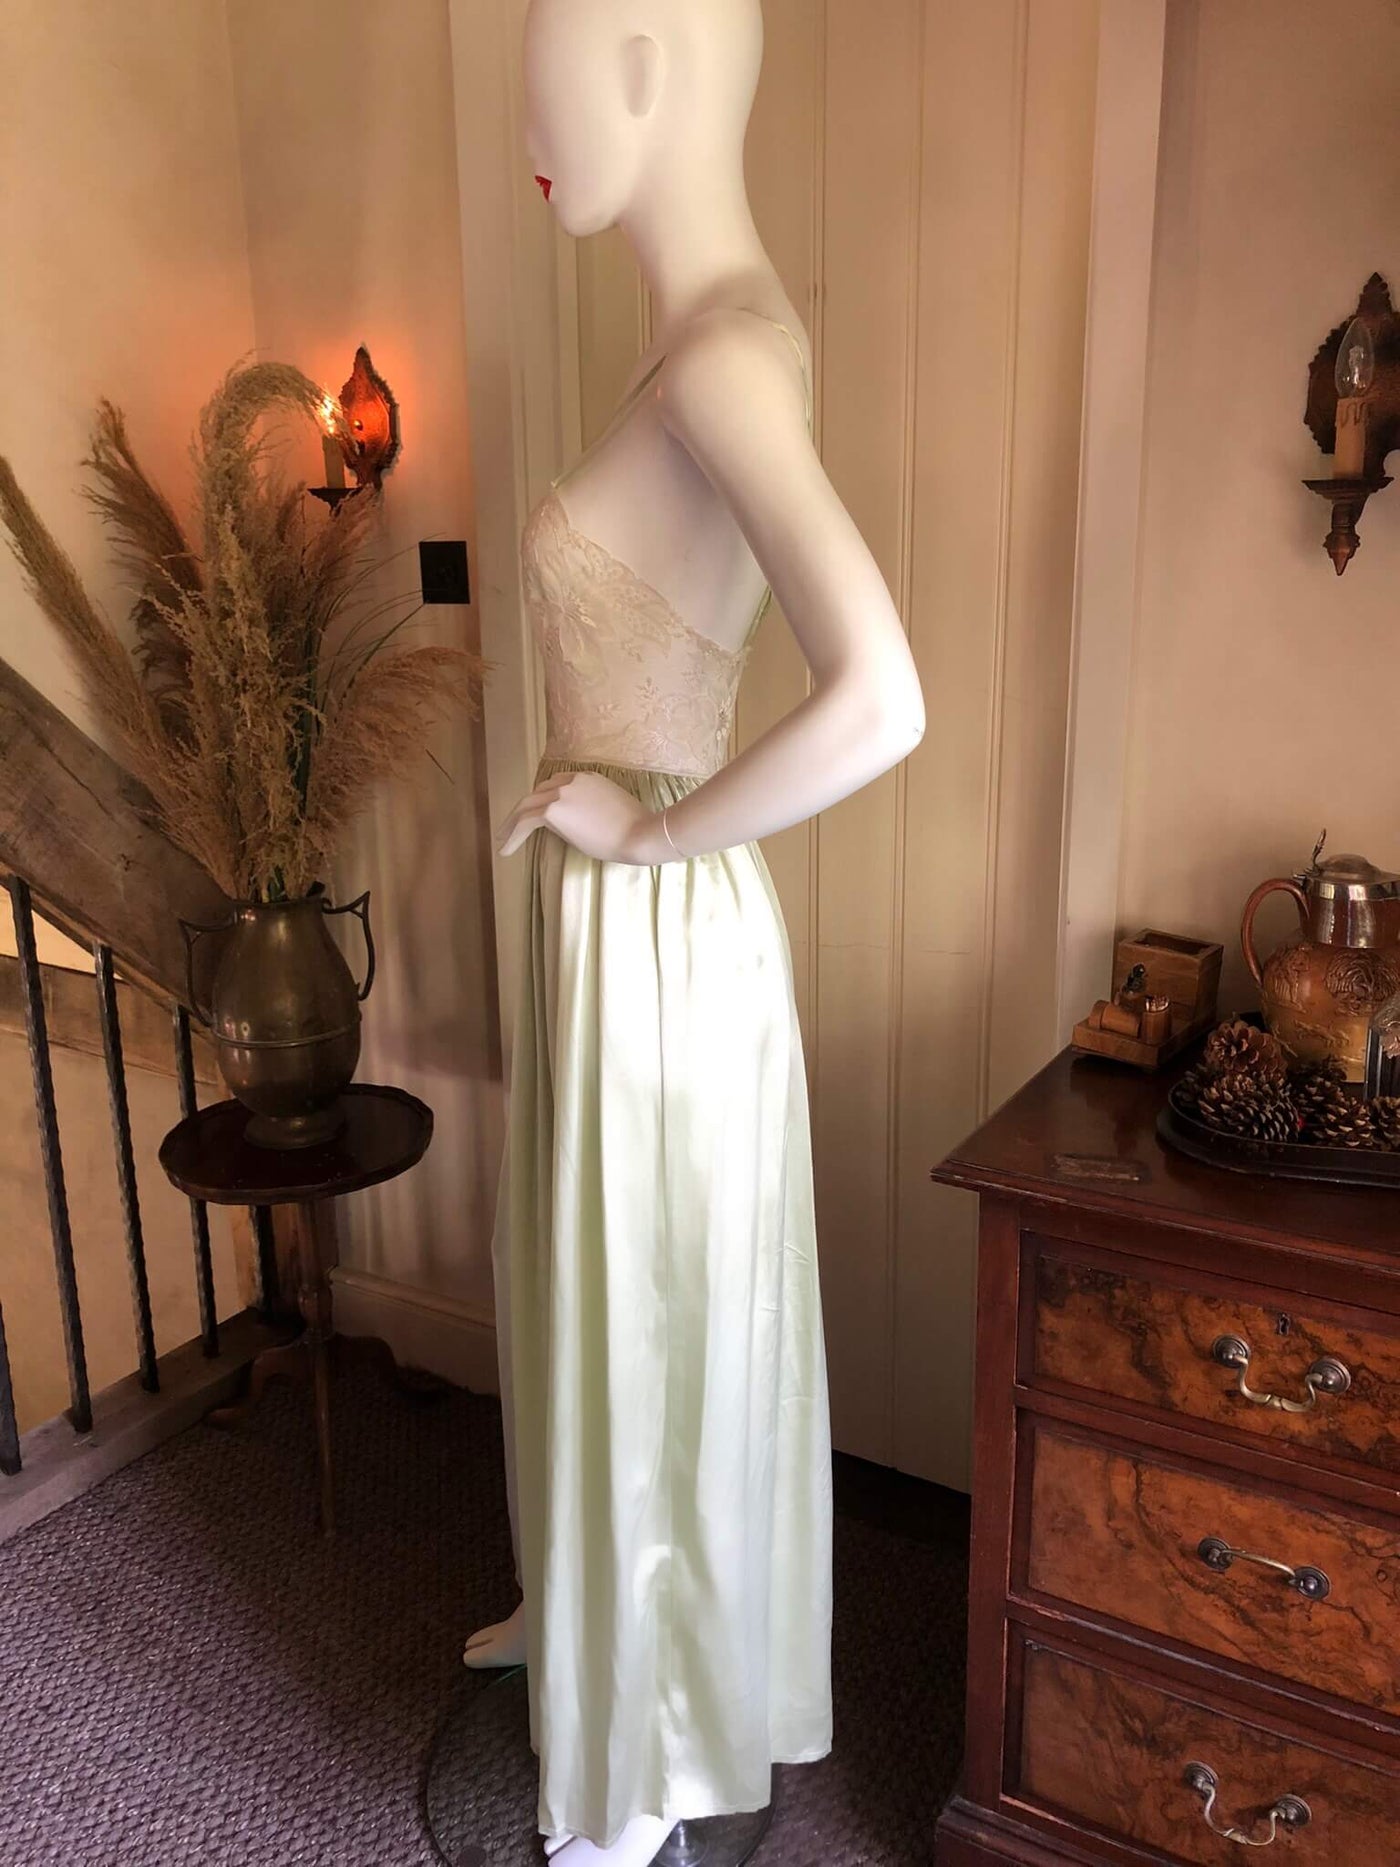 Mint green Janet Reger dress with gown